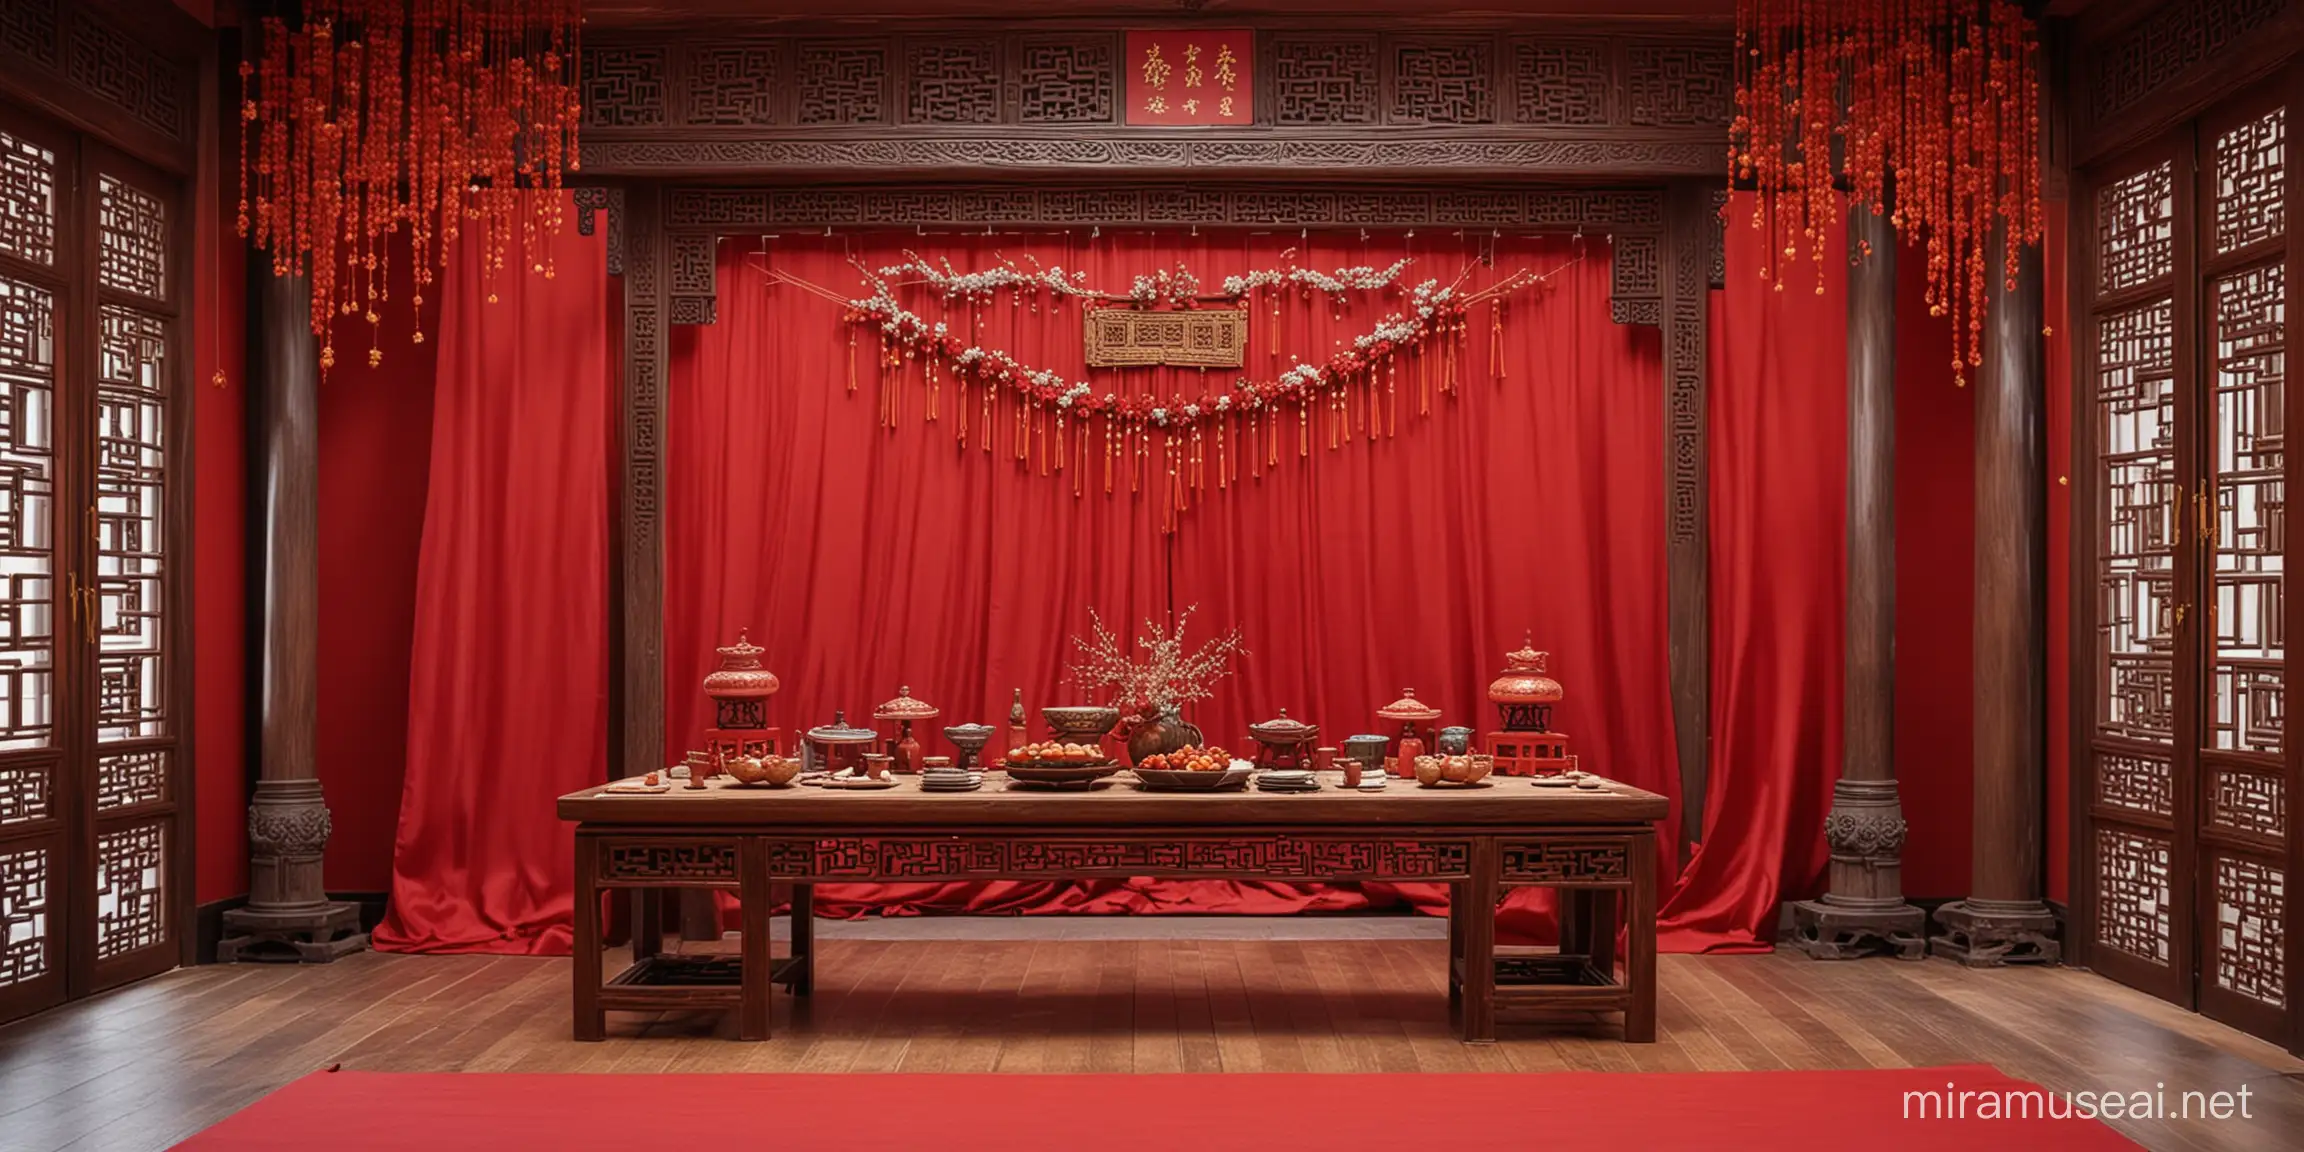 Traditional Chinese Wedding Ceremony in an Ancient Ancestral Hall with Red Backdrop